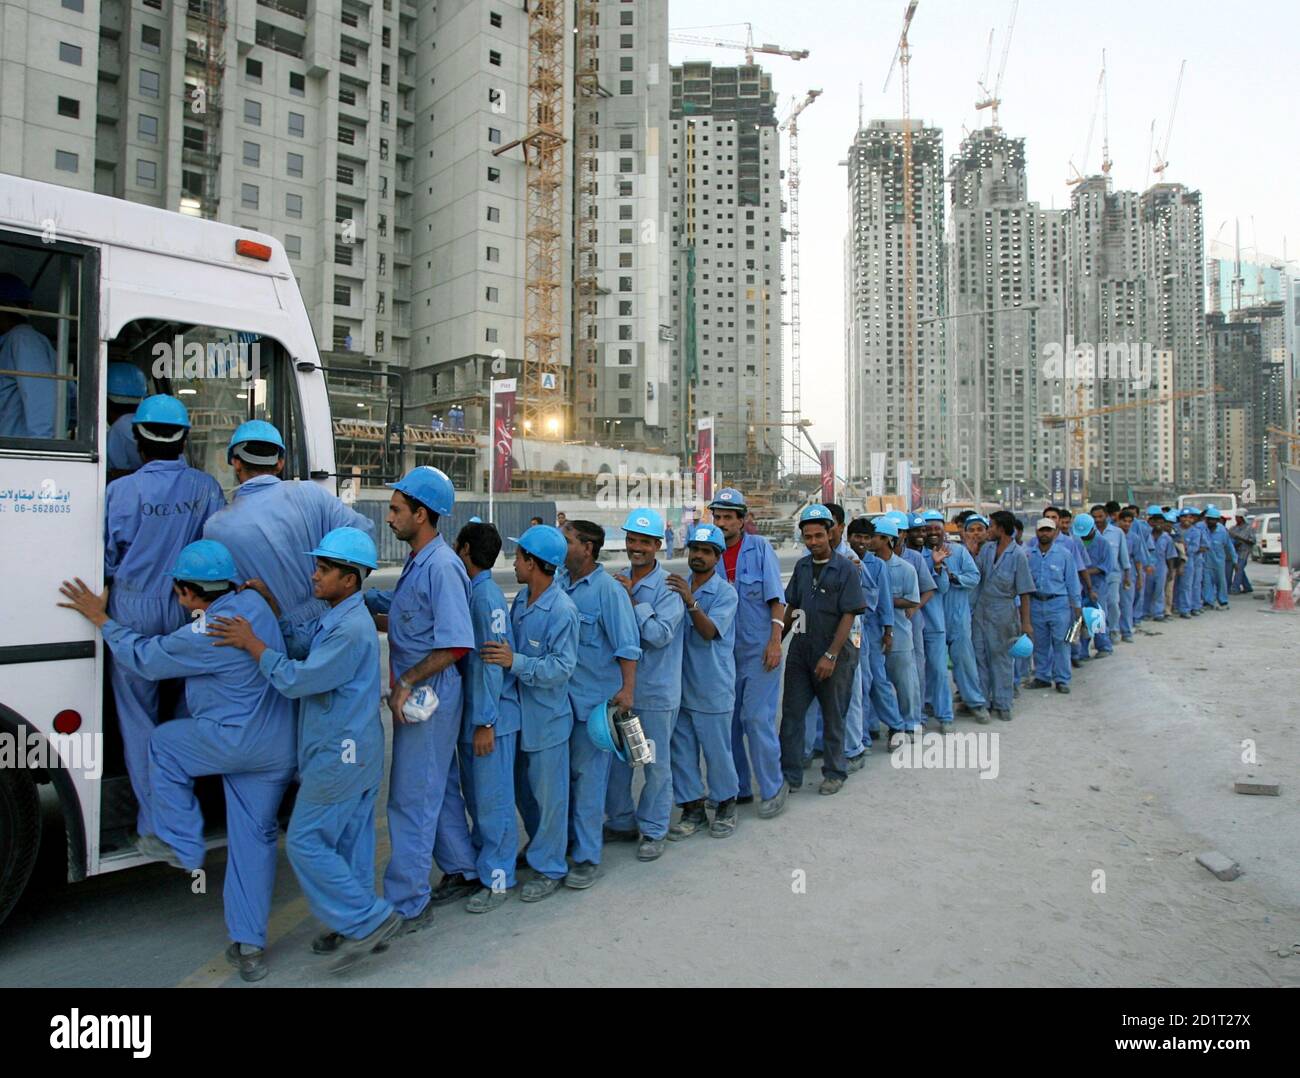 Southasian workers line up to board a bus after a day's work in Dubai on November 18, 2005. Thousands of foreign workers, who are behind the rapid development drive that has transformed the UAE into a modern state, have gone on strike over unpaid wages in the United Arab Emirates this year. The United States has been urging the UAE and other Gulf Arab to conform to the International Labour Organisation's standards. Stock Photo